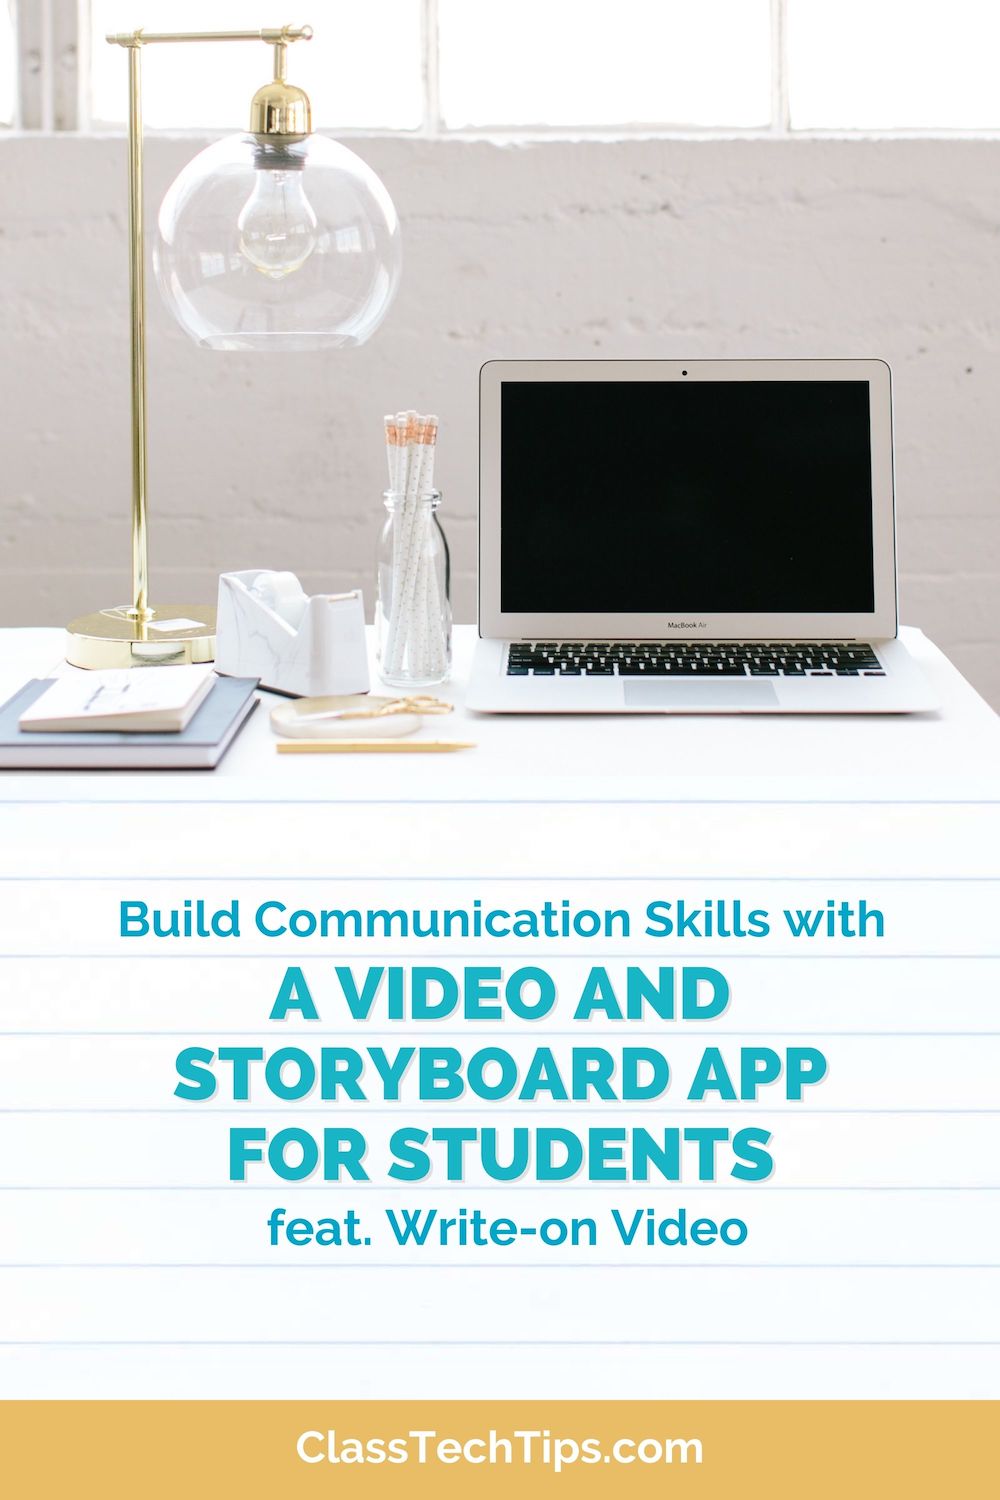 A video and storyboard app can help students plan, produce and share a video of their own this school year.